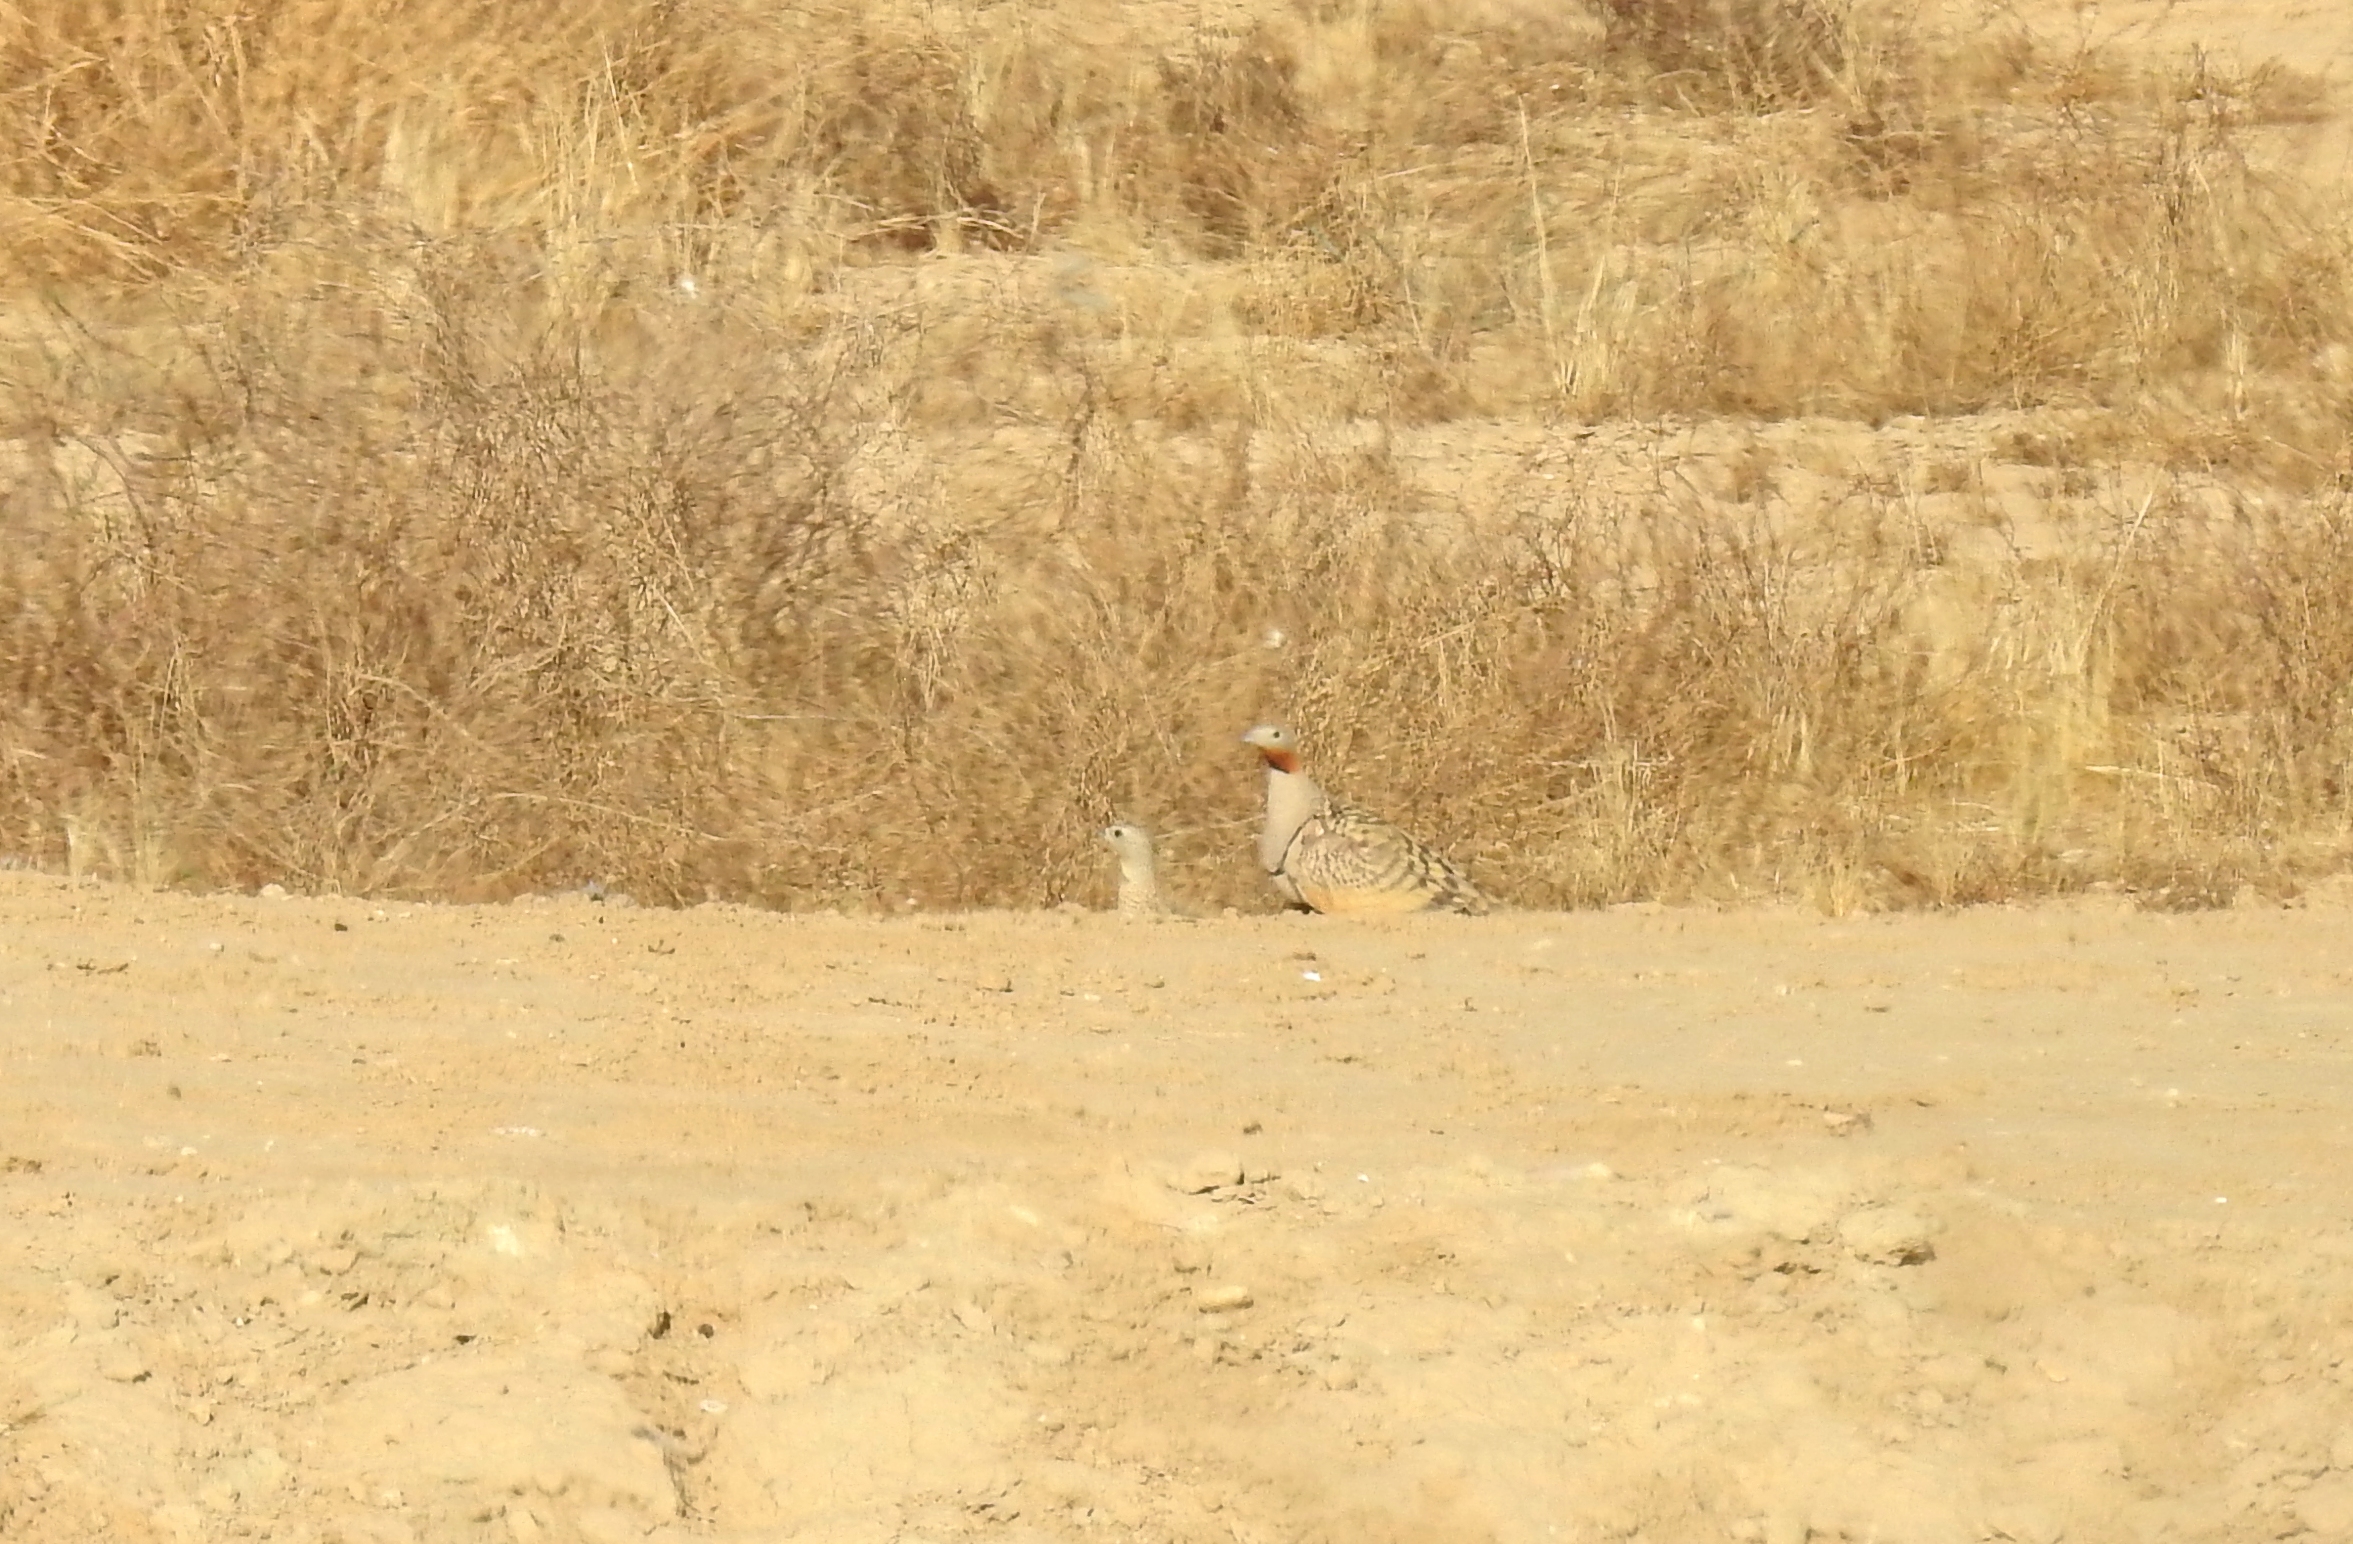 A pair of black-bellied sandgrouse